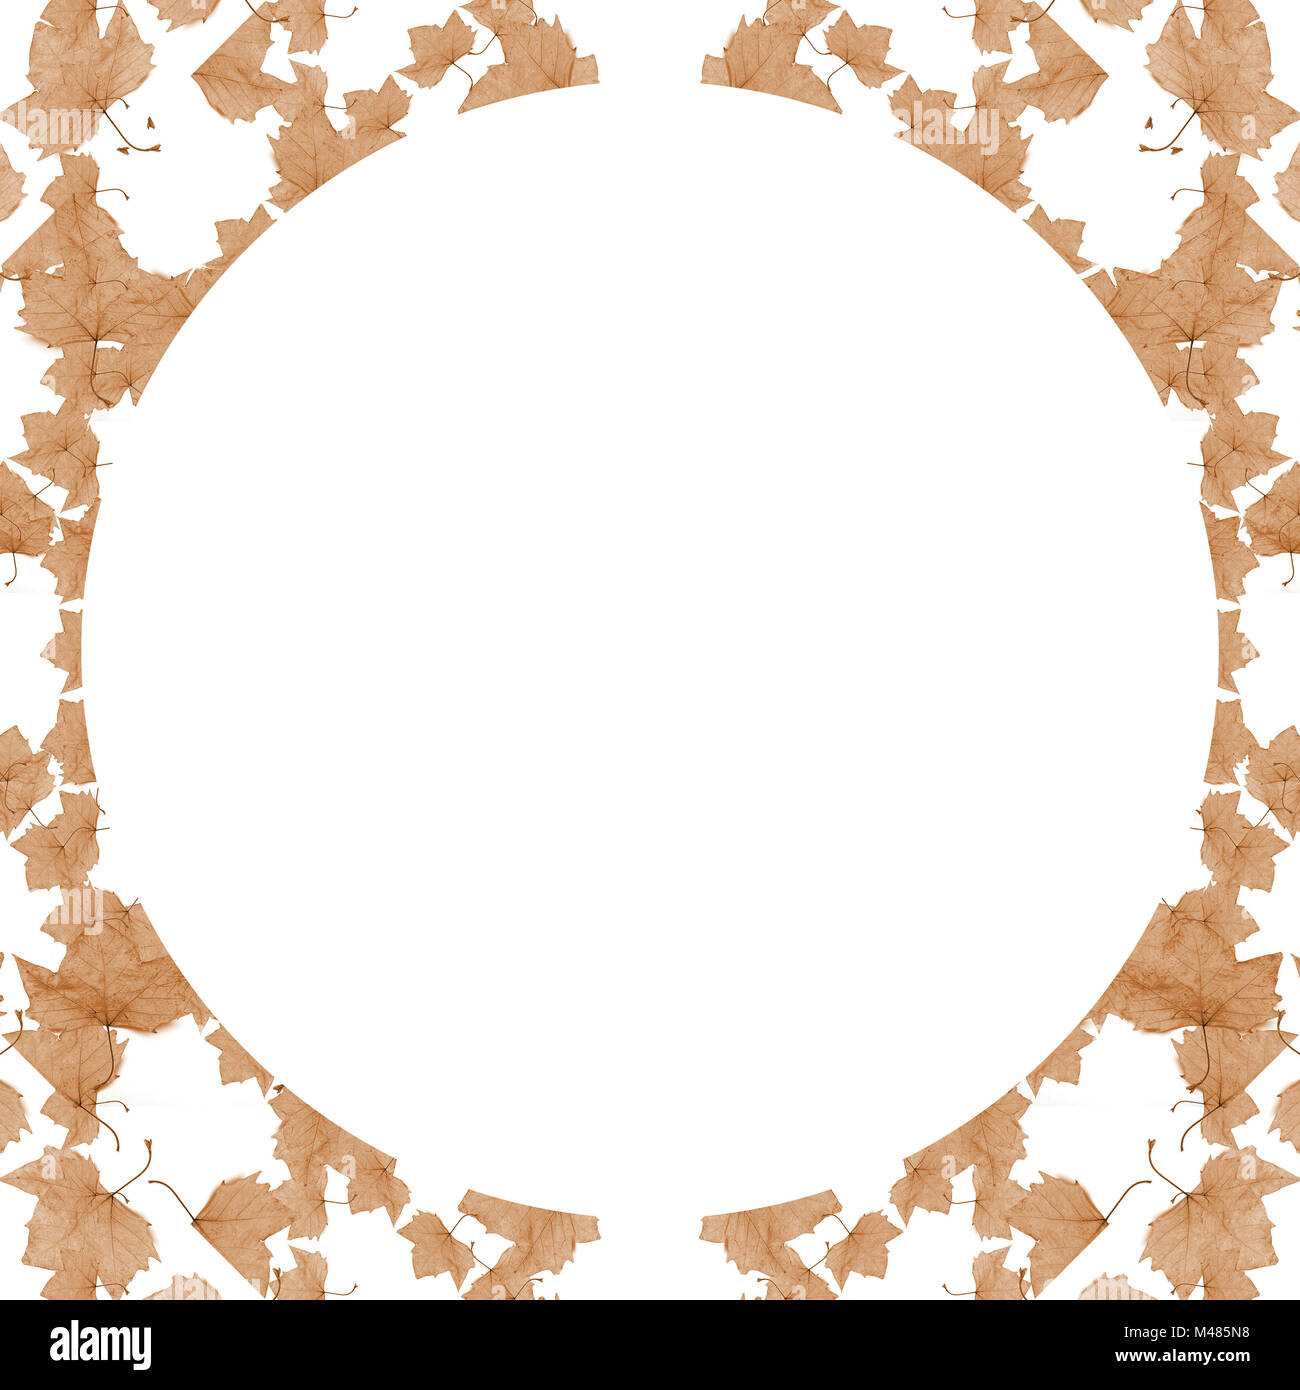 White Background Frame with Round Decorated Borders Stock Photo